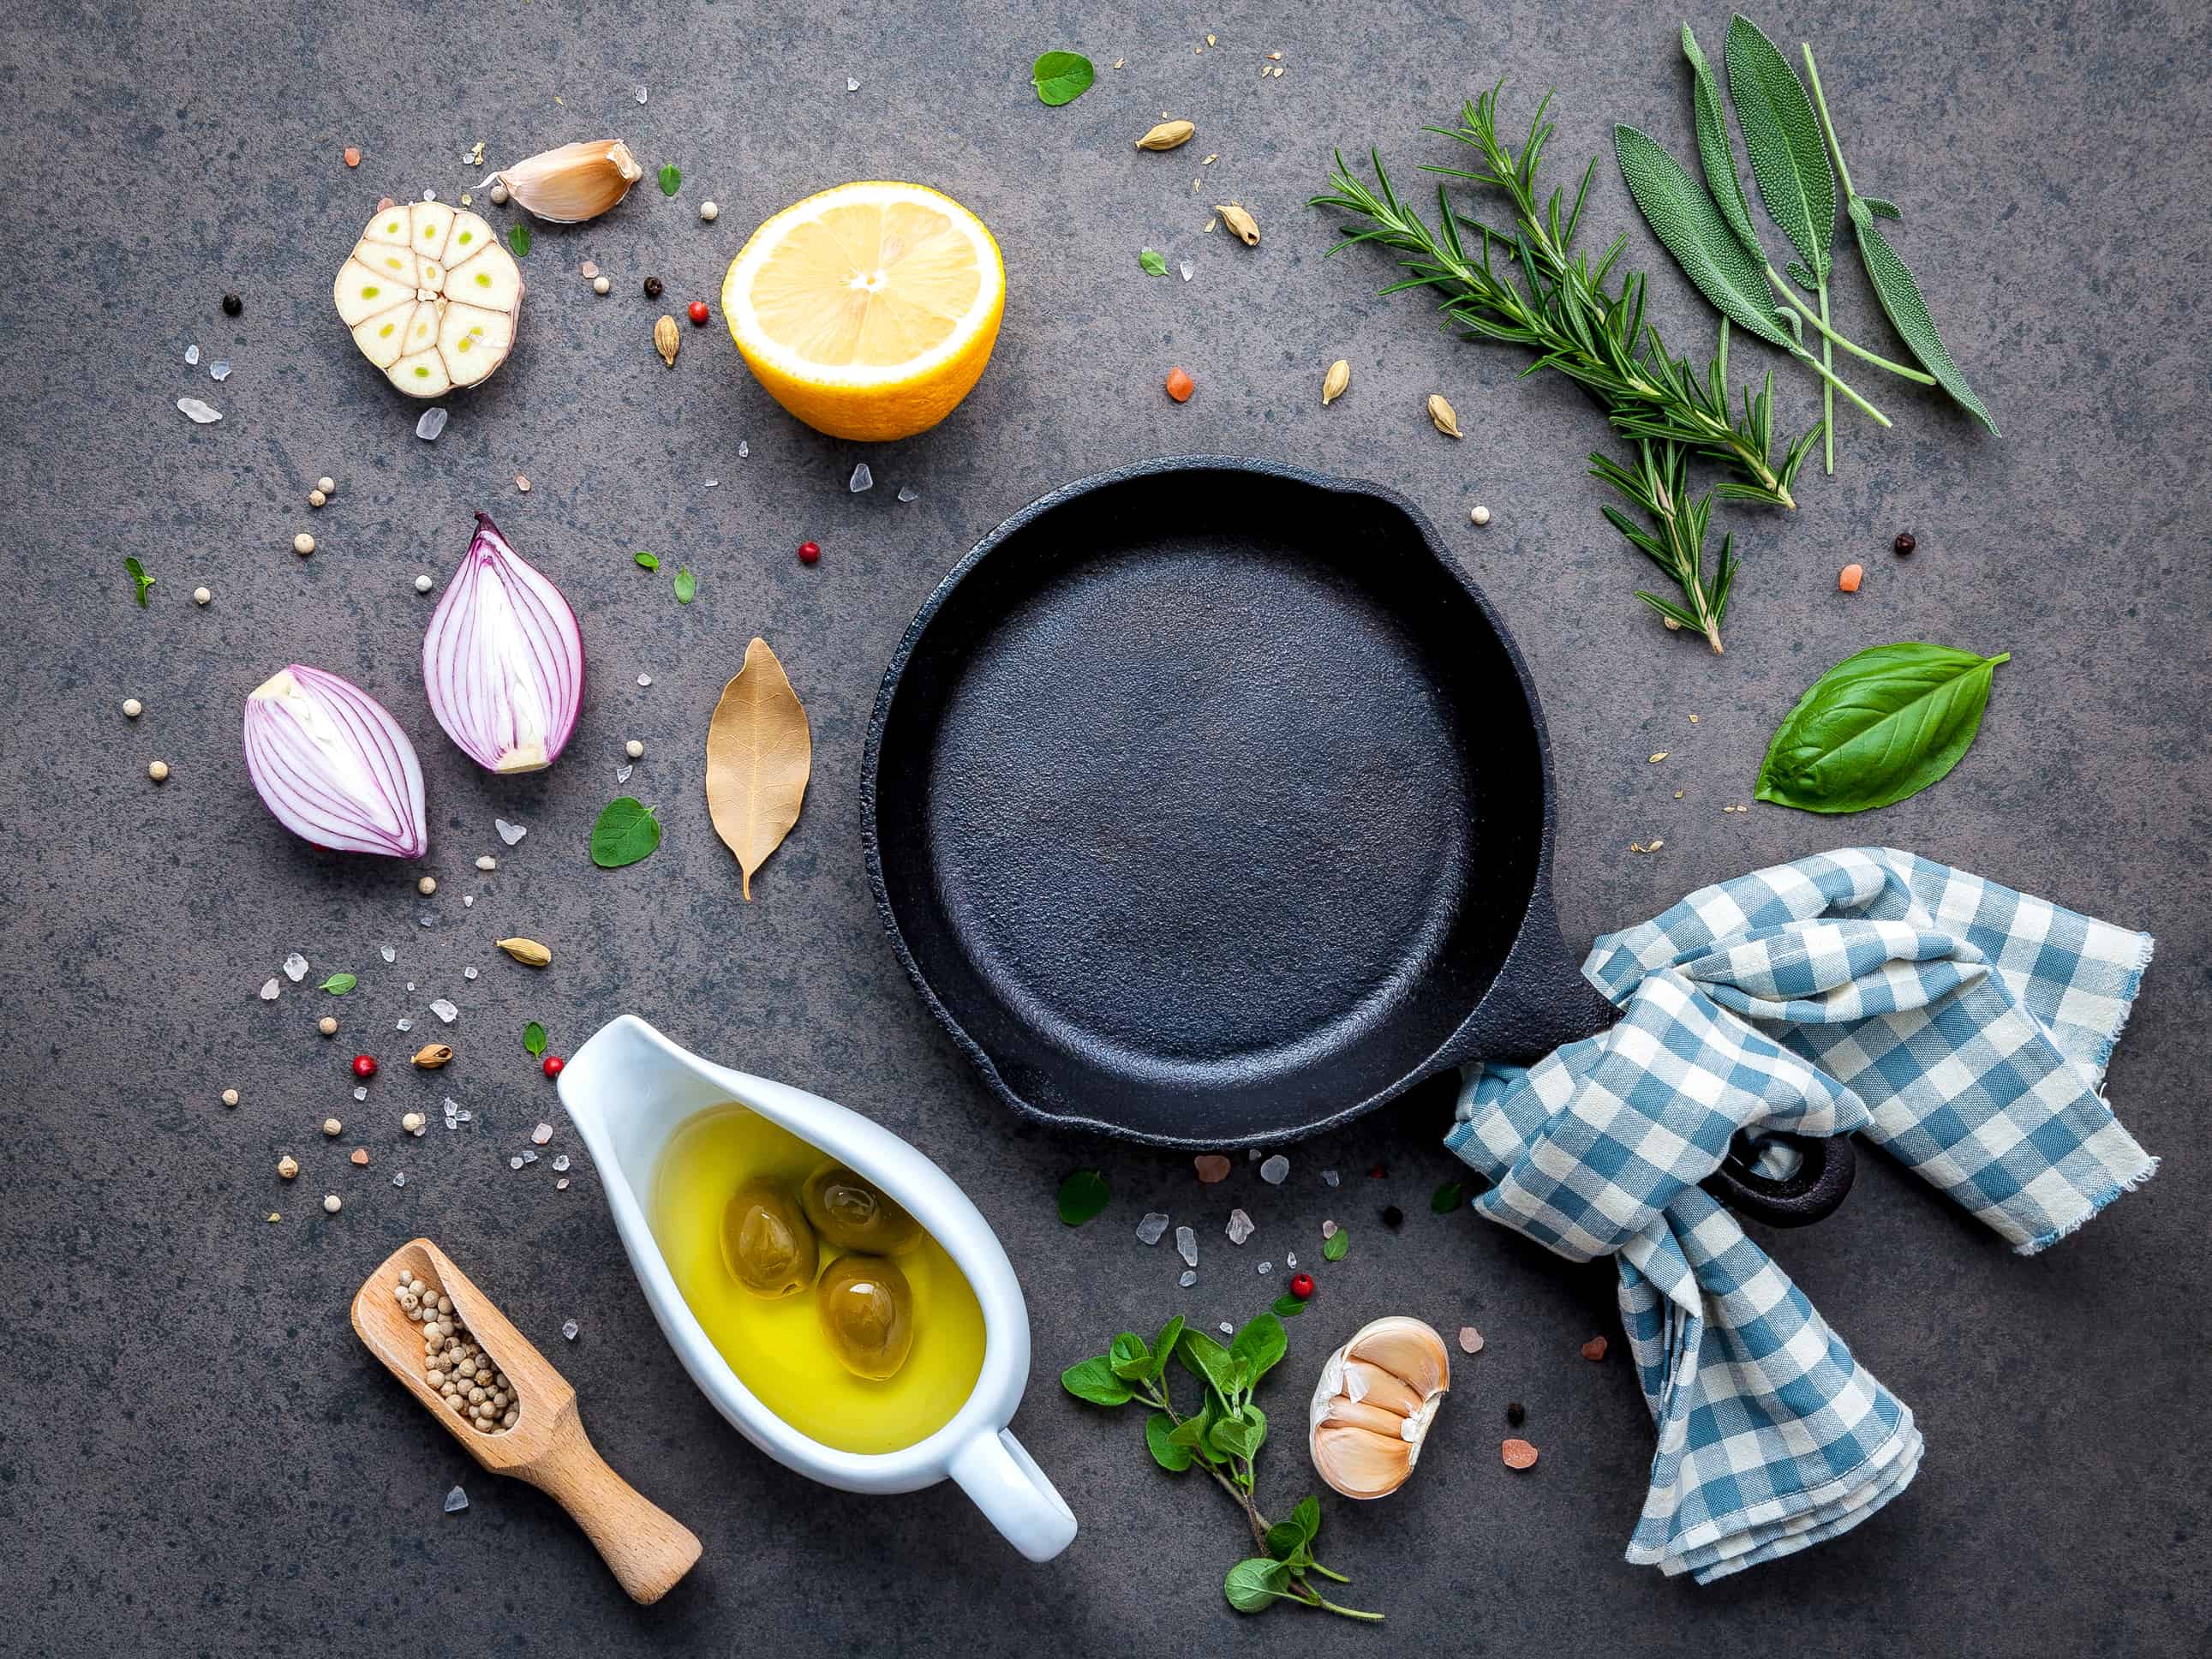 An easy guide on how to season a cast iron skillet, Dutch oven, or griddle and all your questions about how to care for cast iron answered in one spot. #howtoseasoncastiron #castironcare www.savoryexperiments.com 